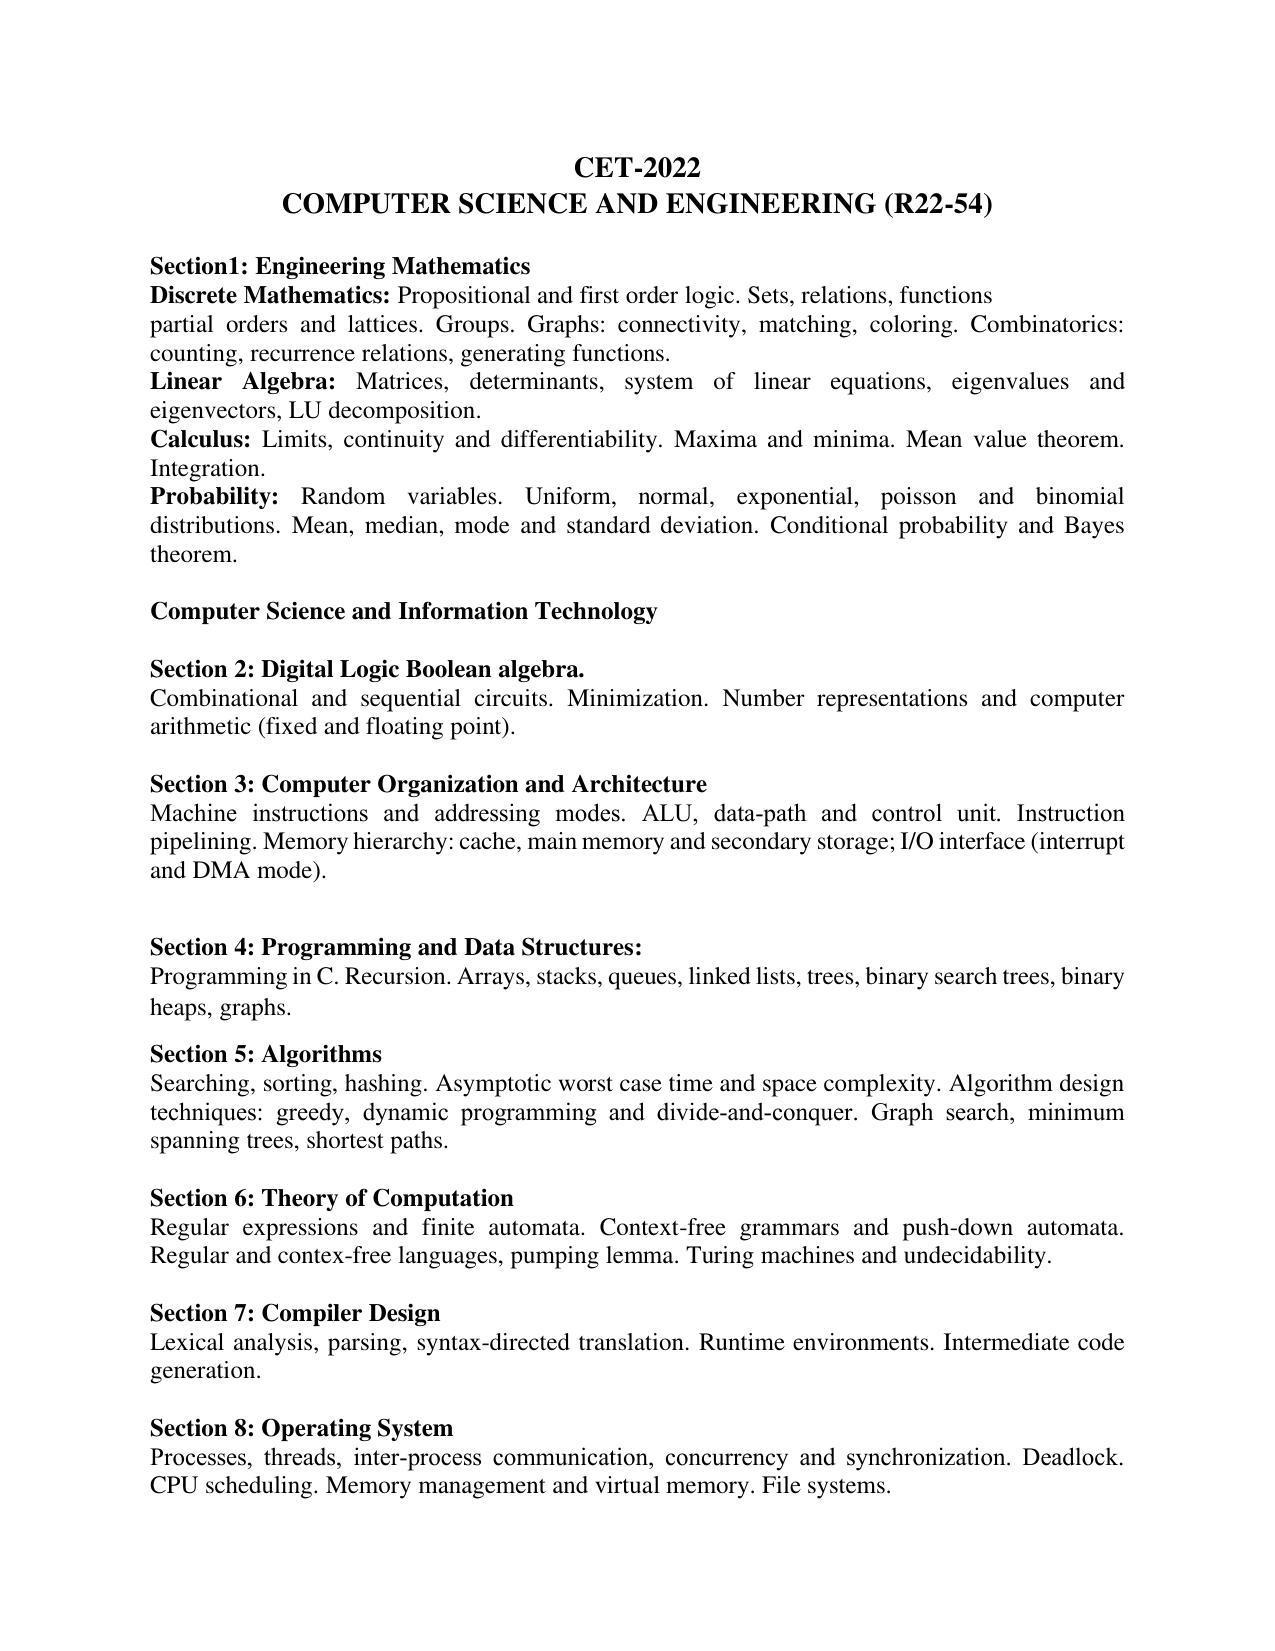 AP RCET Computer Science And Engineering Syllabus - Page 1